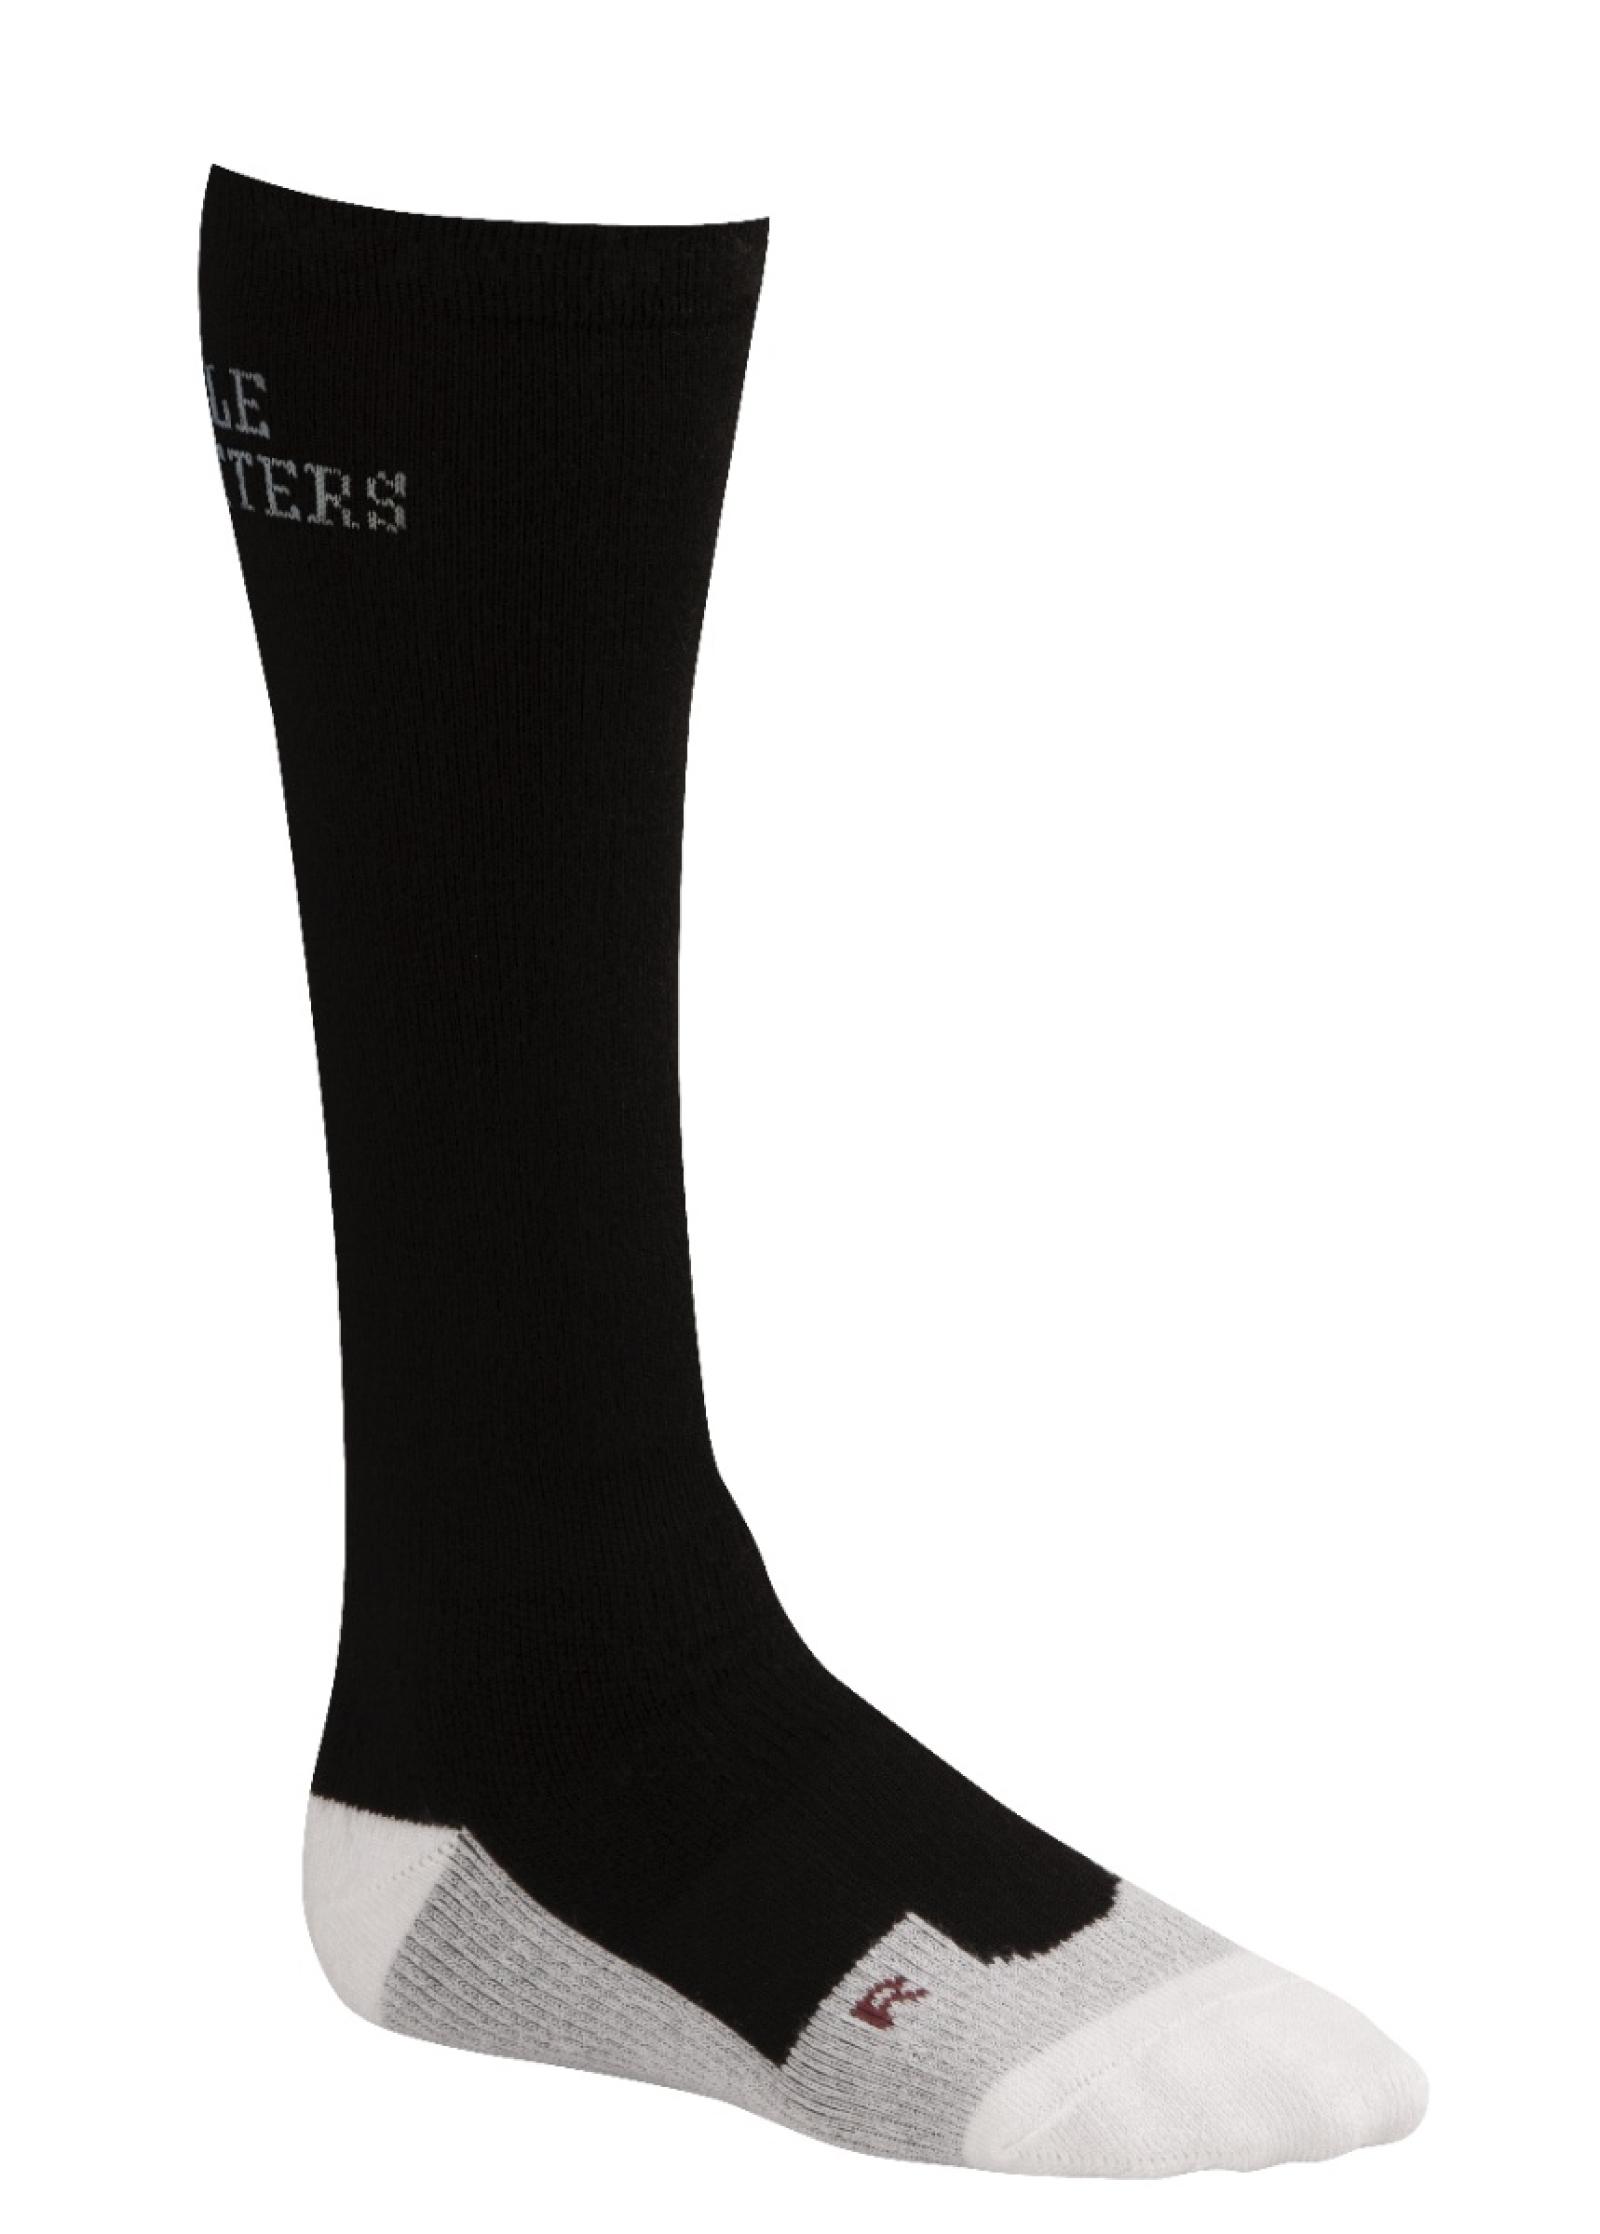 Noble Outfitters Ultimate Support Boot Sock